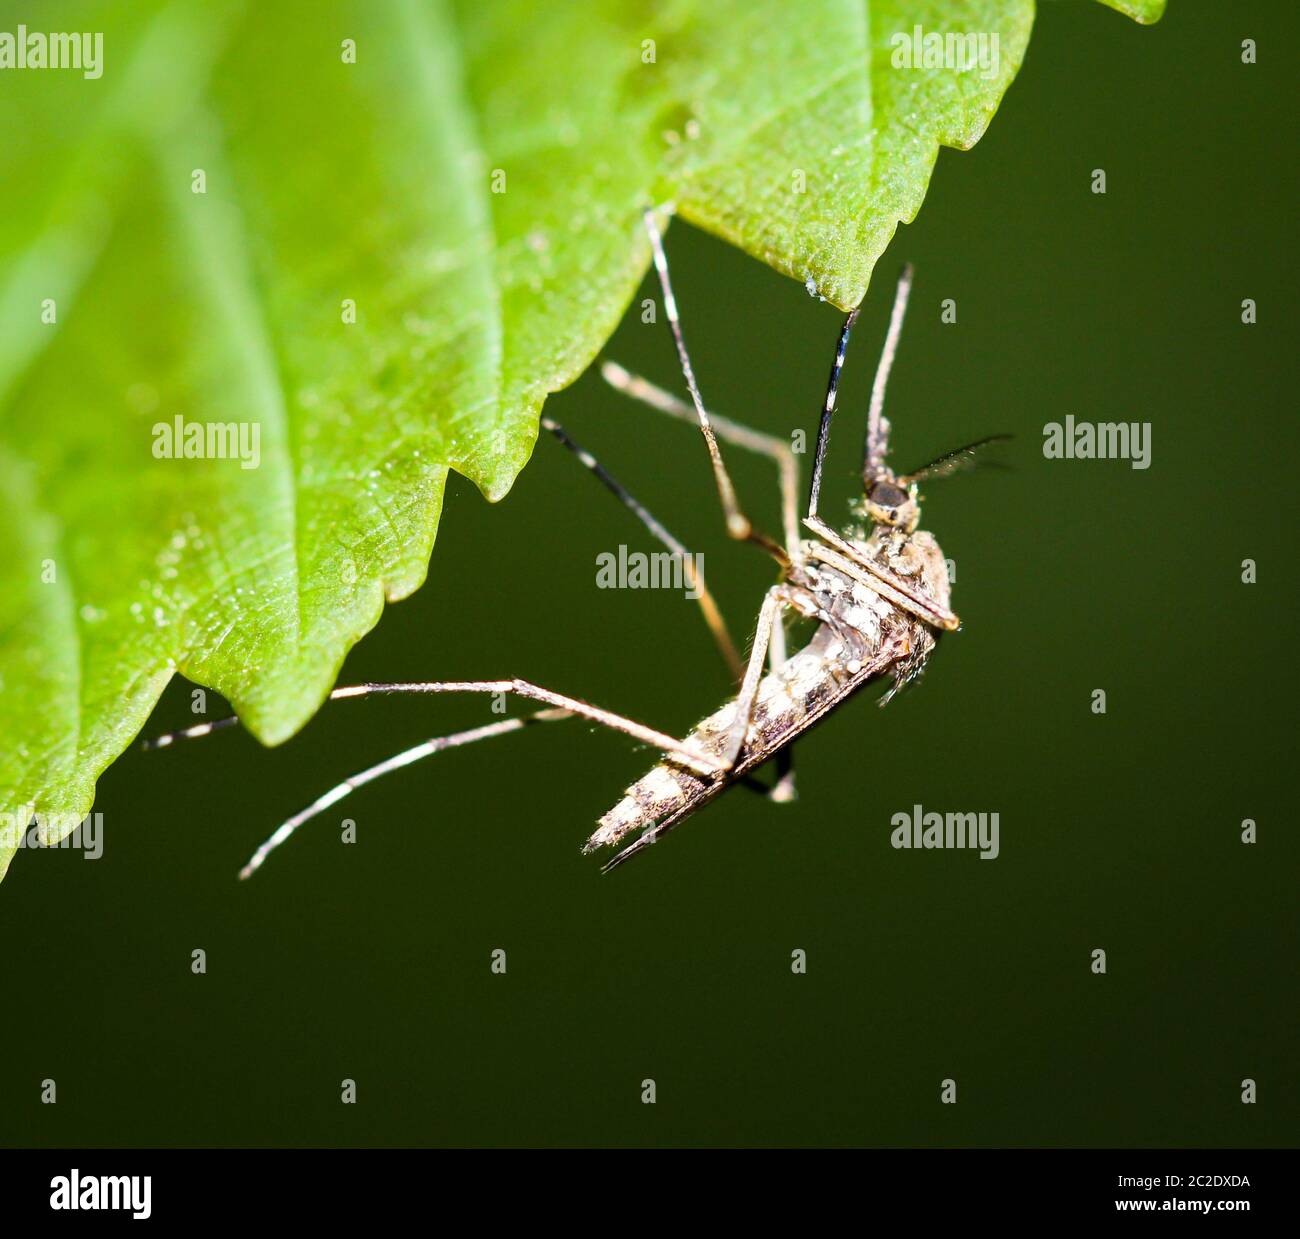 a mosquito on a leaf in the forest Stock Photo